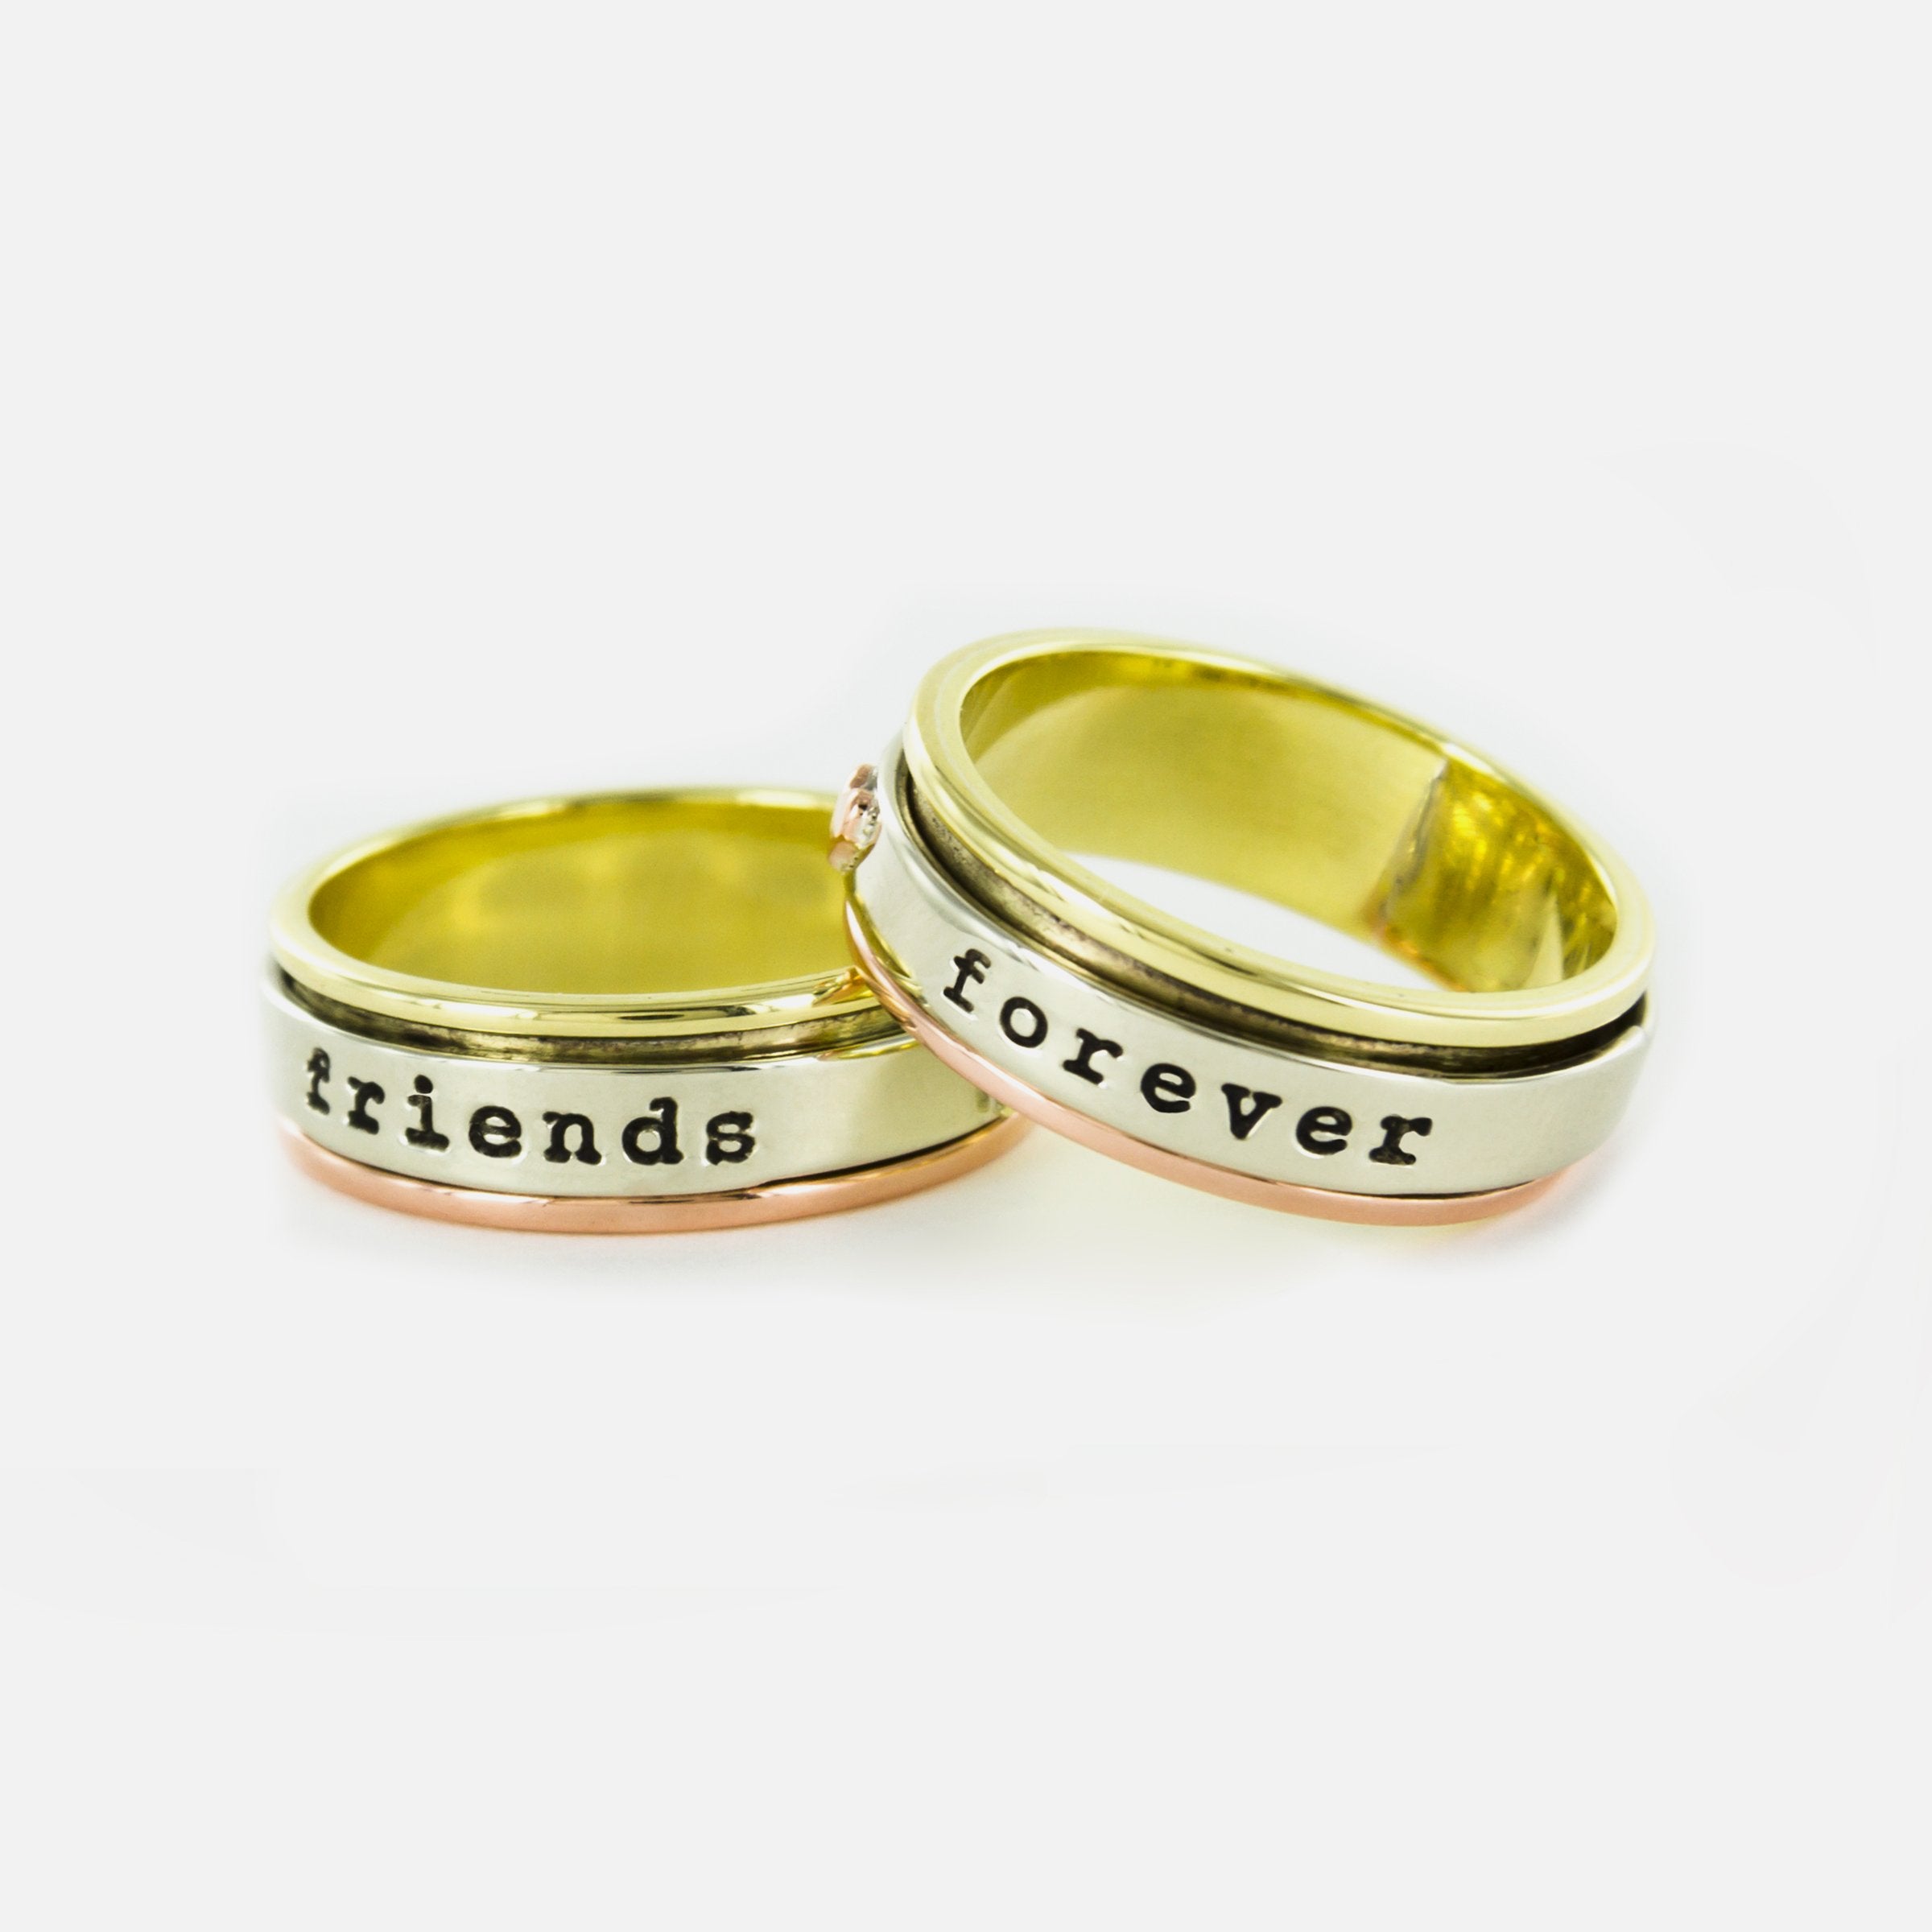 Friends Forever Mixed Metals Spinning Ring - 7